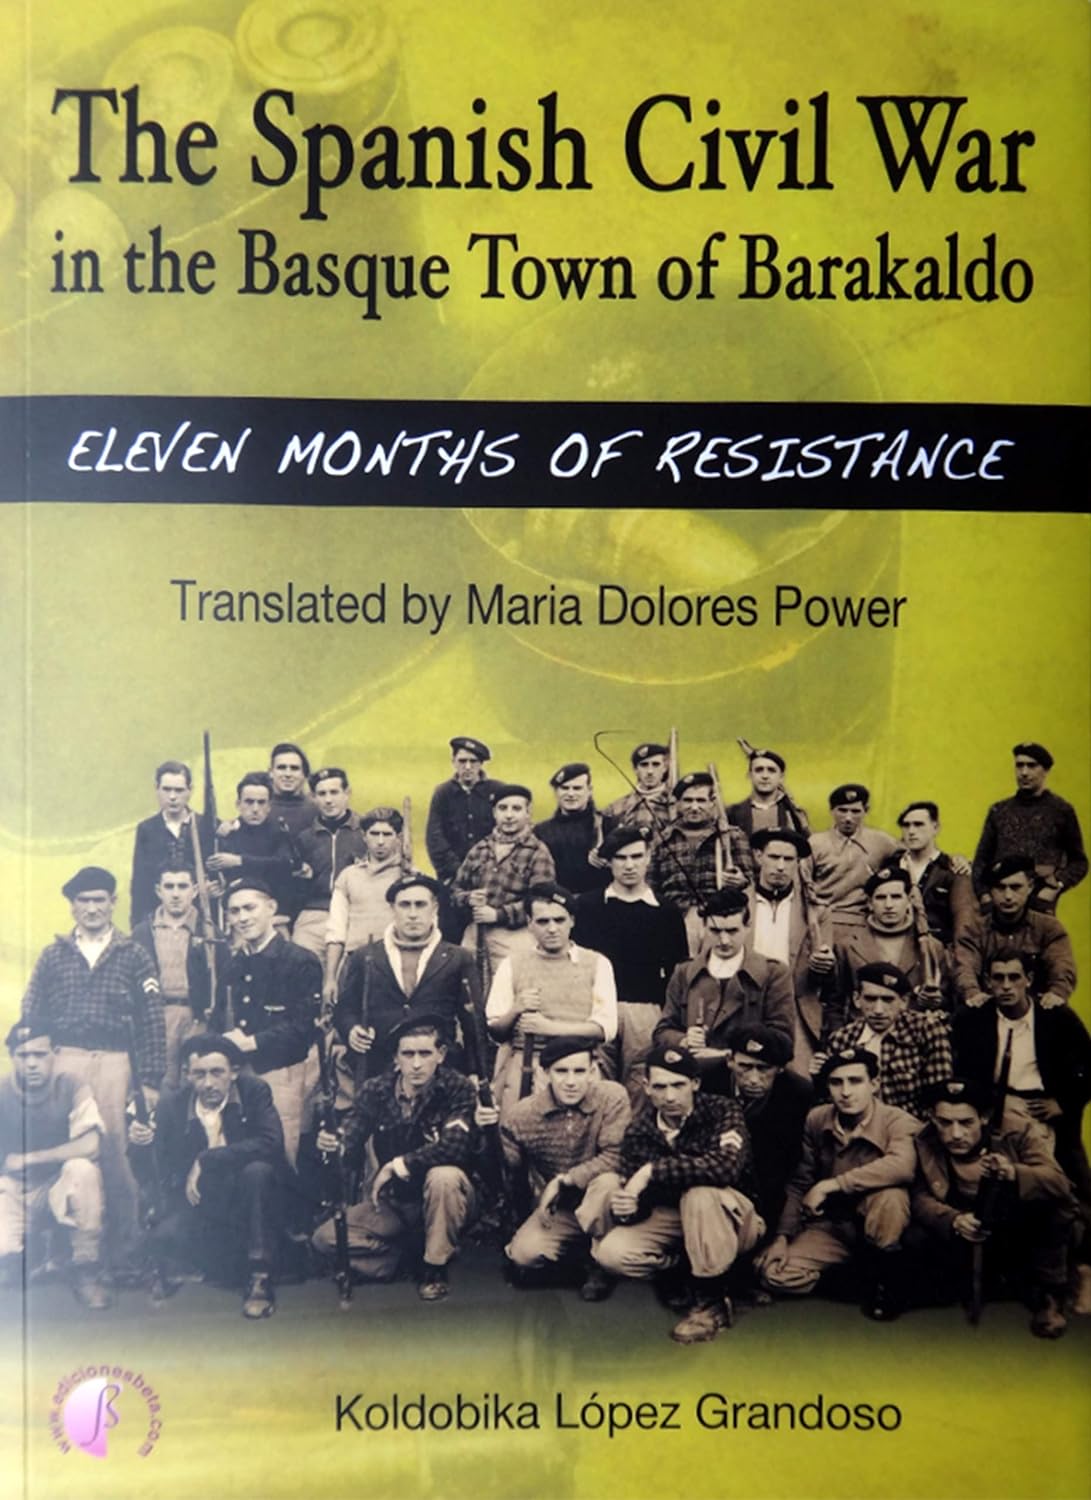 The Spanish Civil War in the Basque Town of Barakaldo: eleven months of resistance